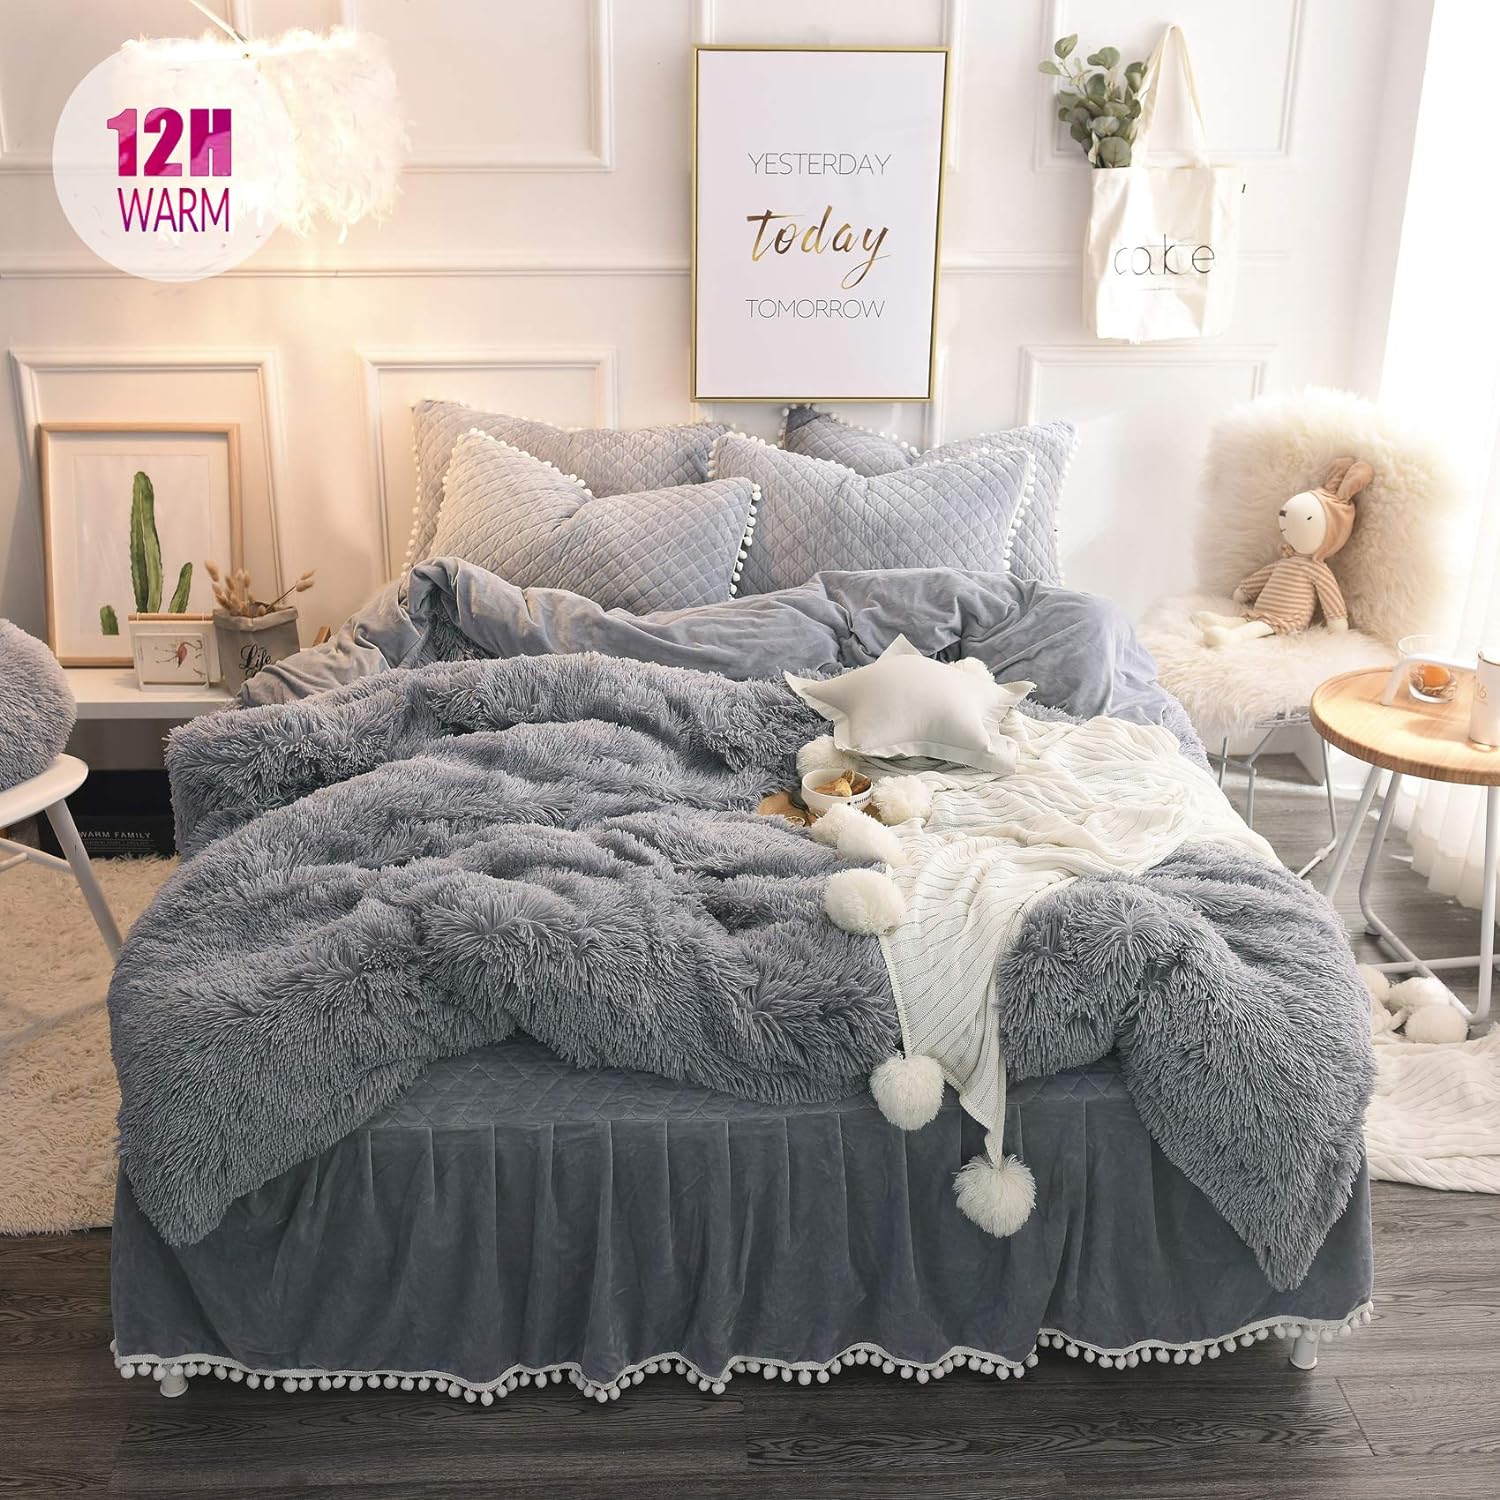 My daughter was upgrading to her own room, so I found this gem online... Loved it! It' very soft, and looks great with the down comforter inside!